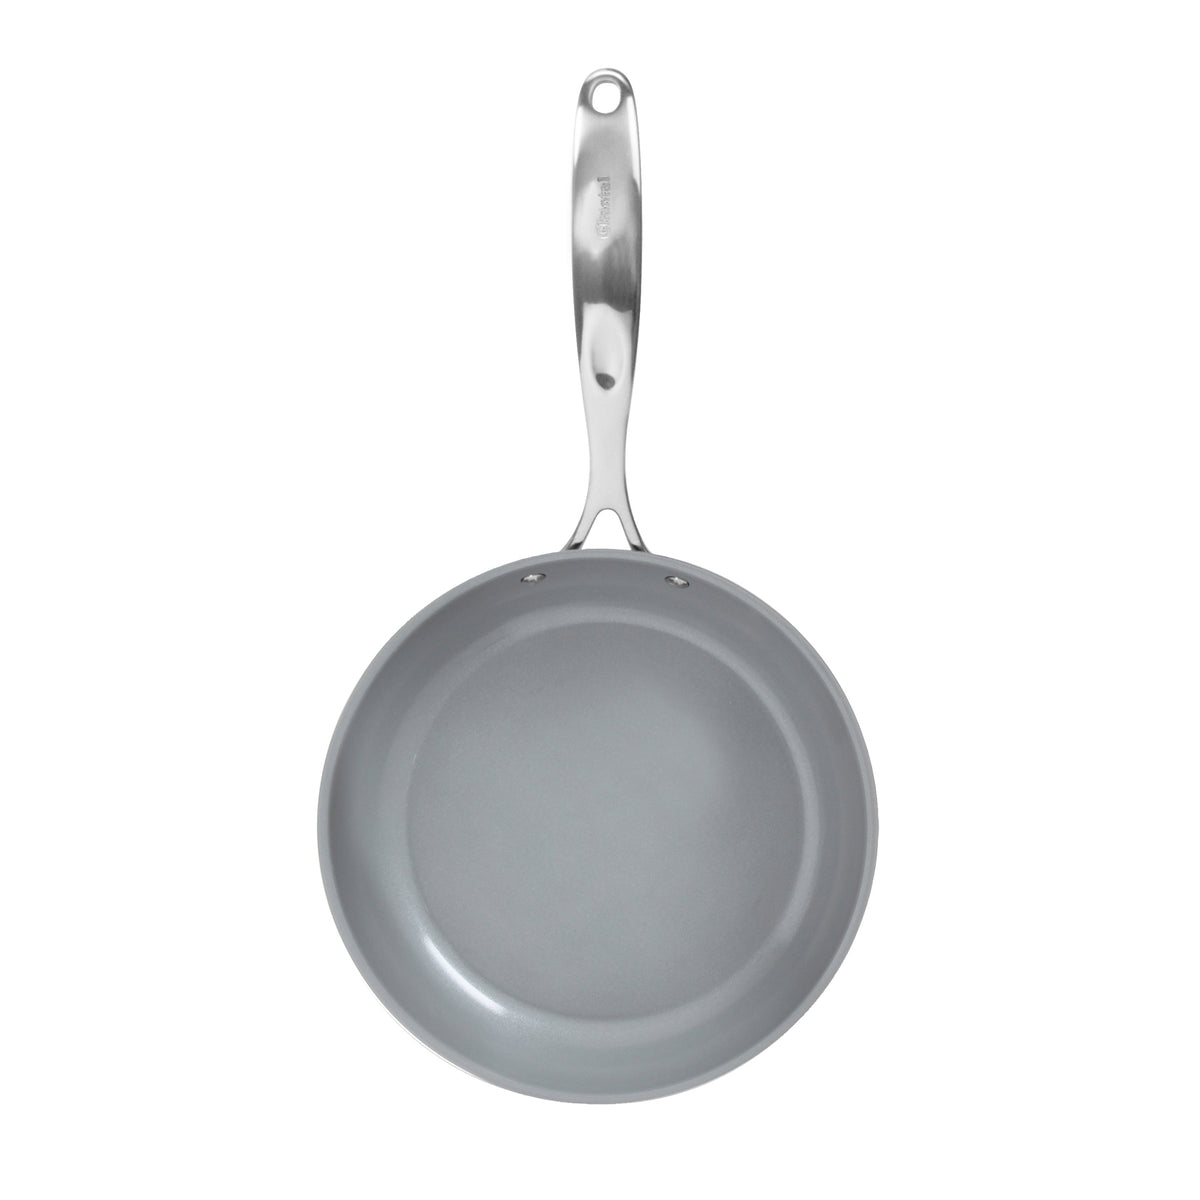 Chantal Induction 21 Steel Fry Pans, Set of 2 